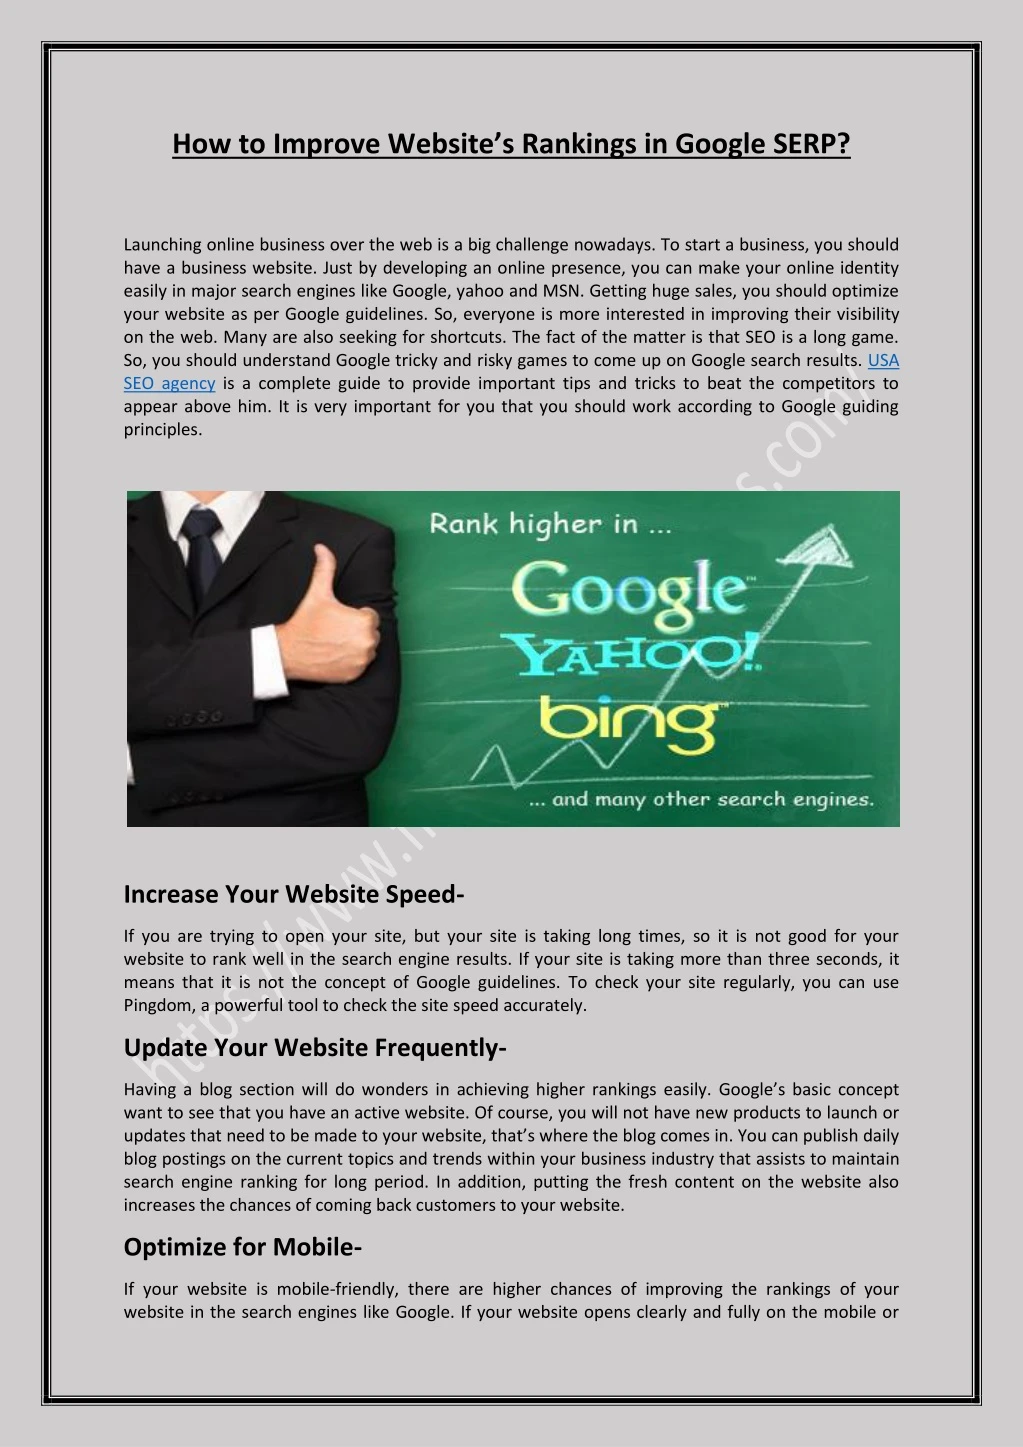 how to improve w ebsite s rankings in google serp